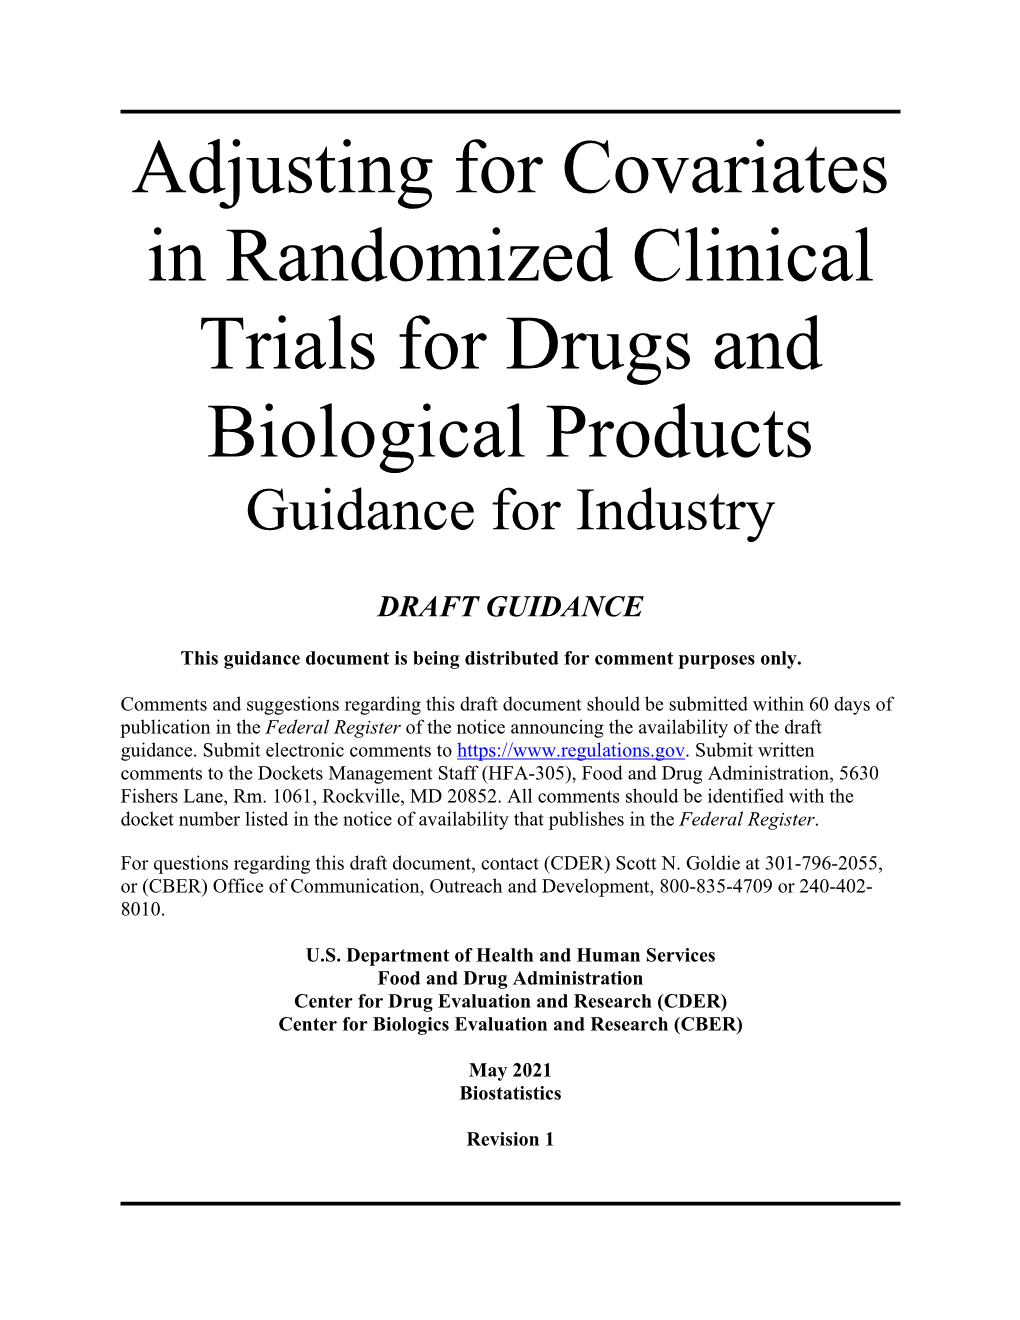 Adjusting for Covariates in Randomized Clinical Trials for Drugs and Biological Products Guidance for Industry